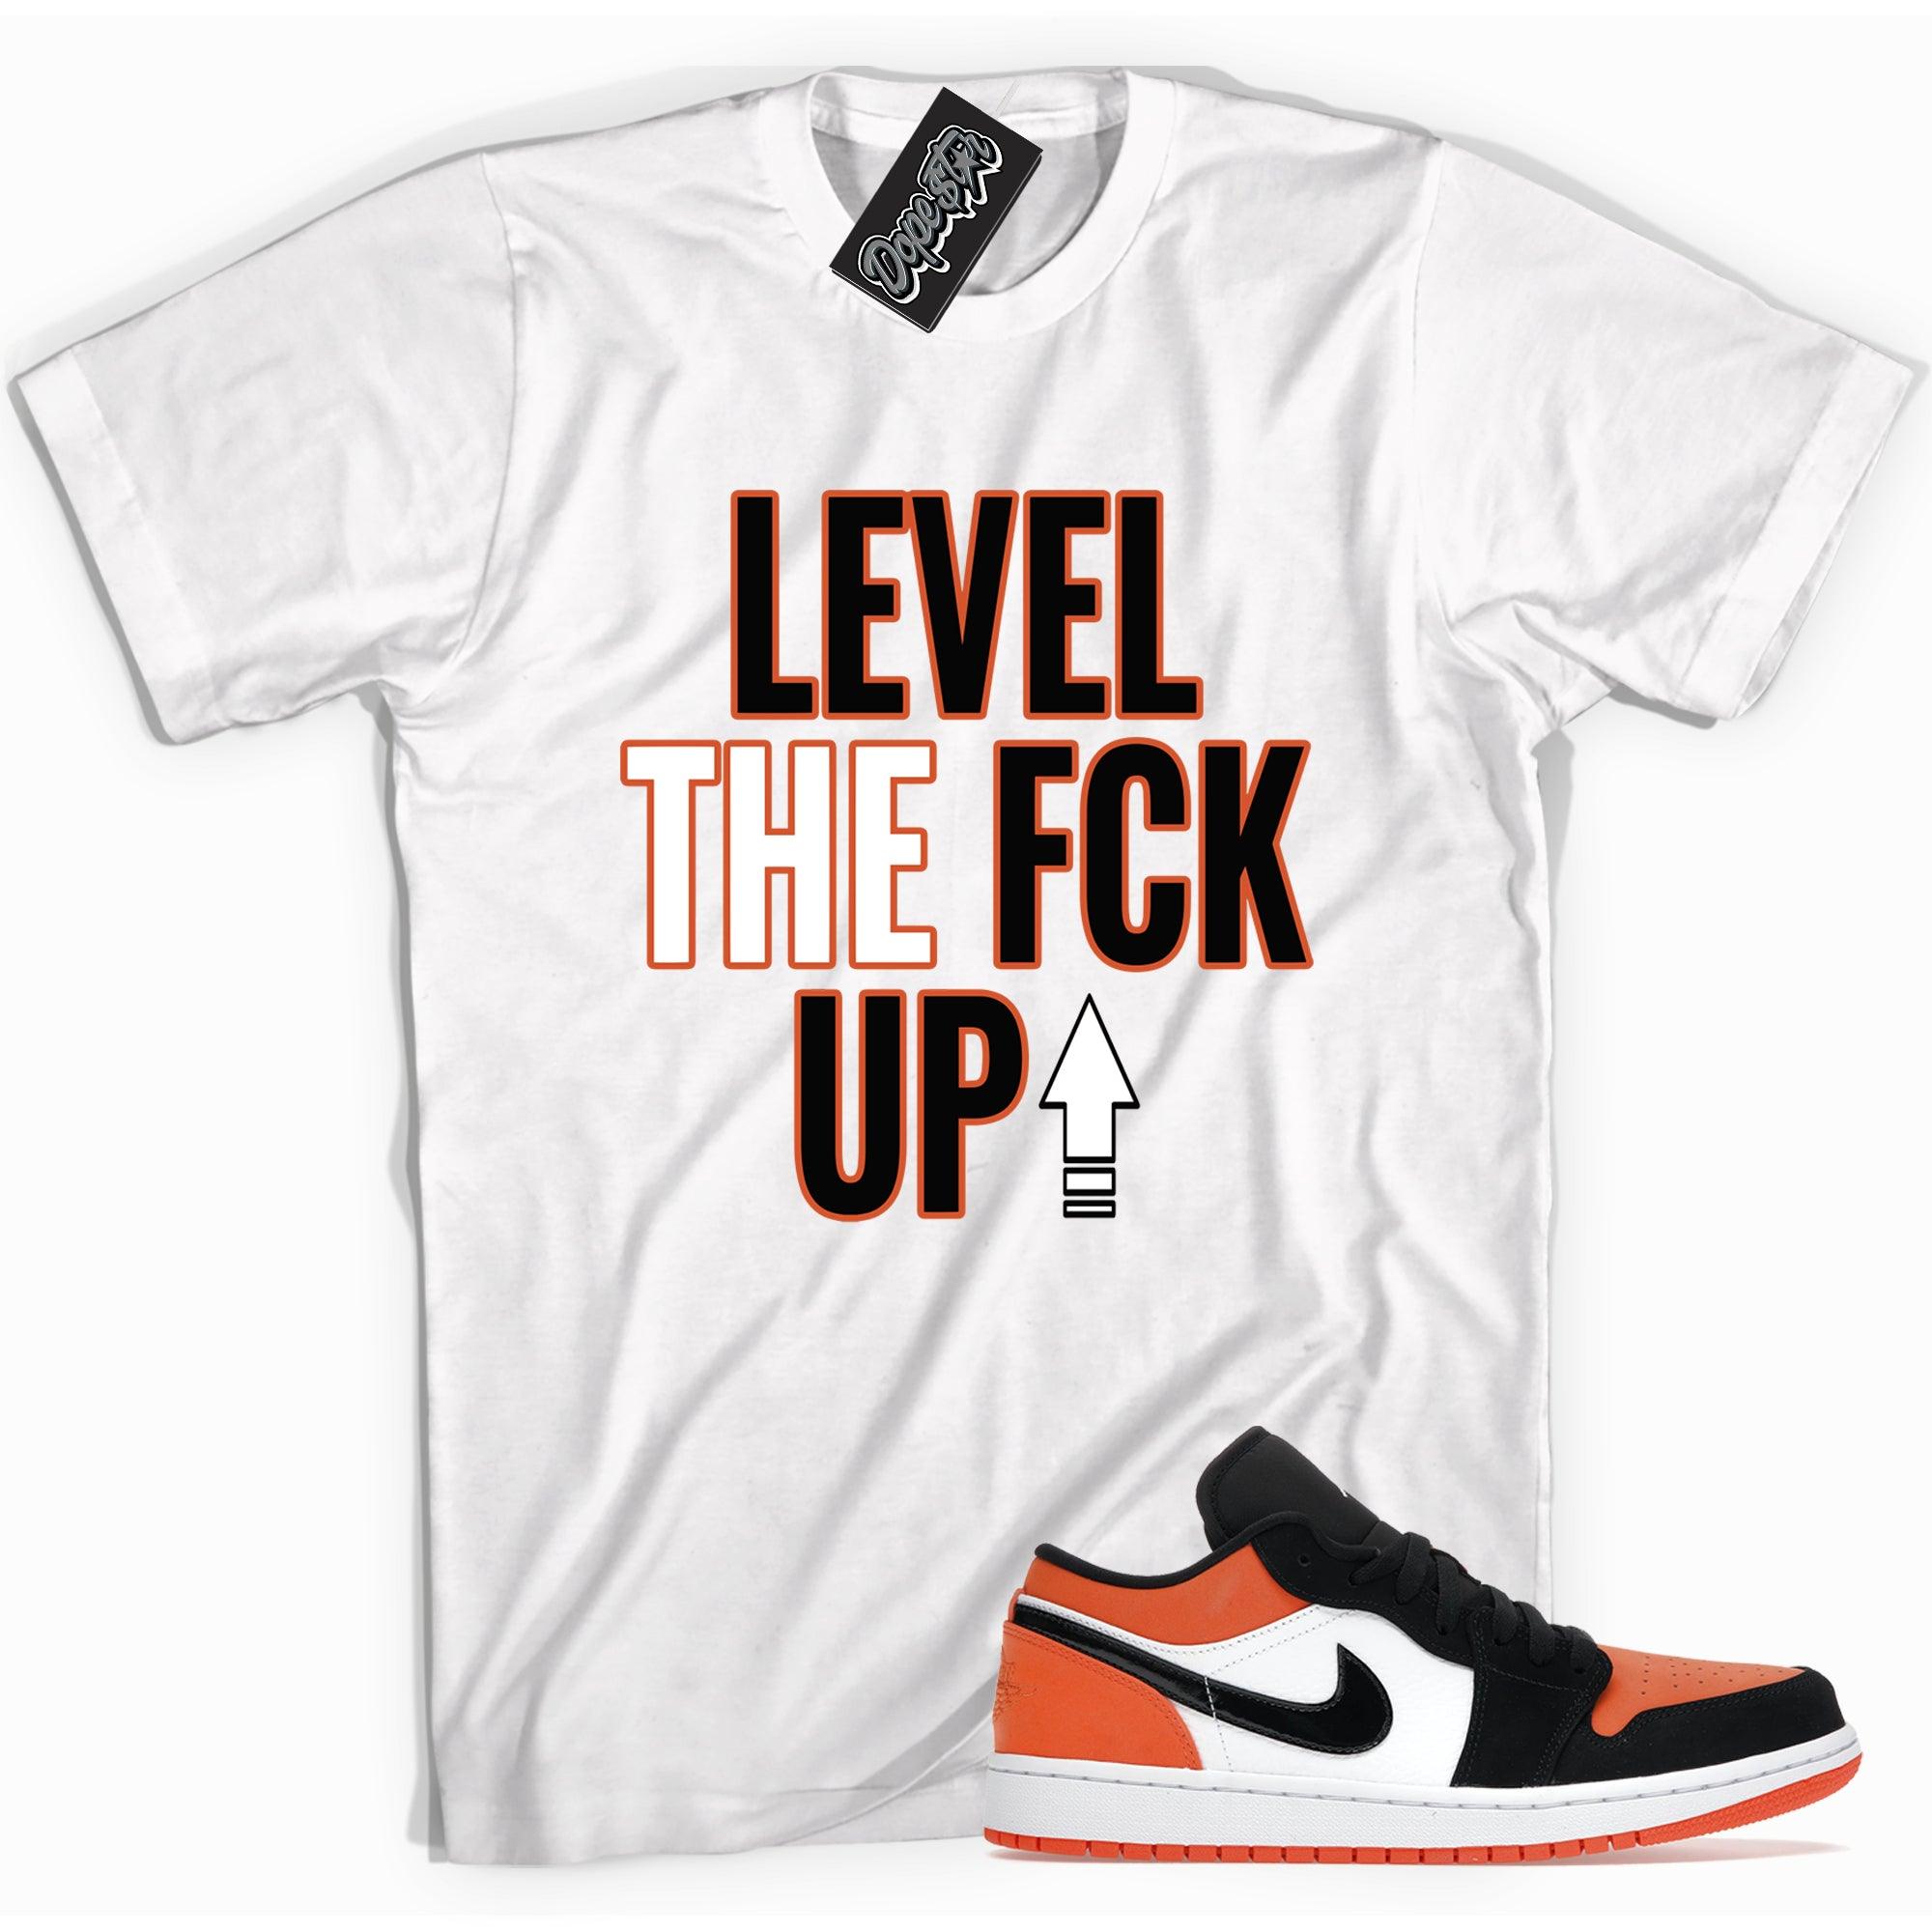 Cool white graphic tee with 'Level Up' print, that perfectly matches Air Jordan 1 Retro Low GolF Shattered Backboard sneakers.